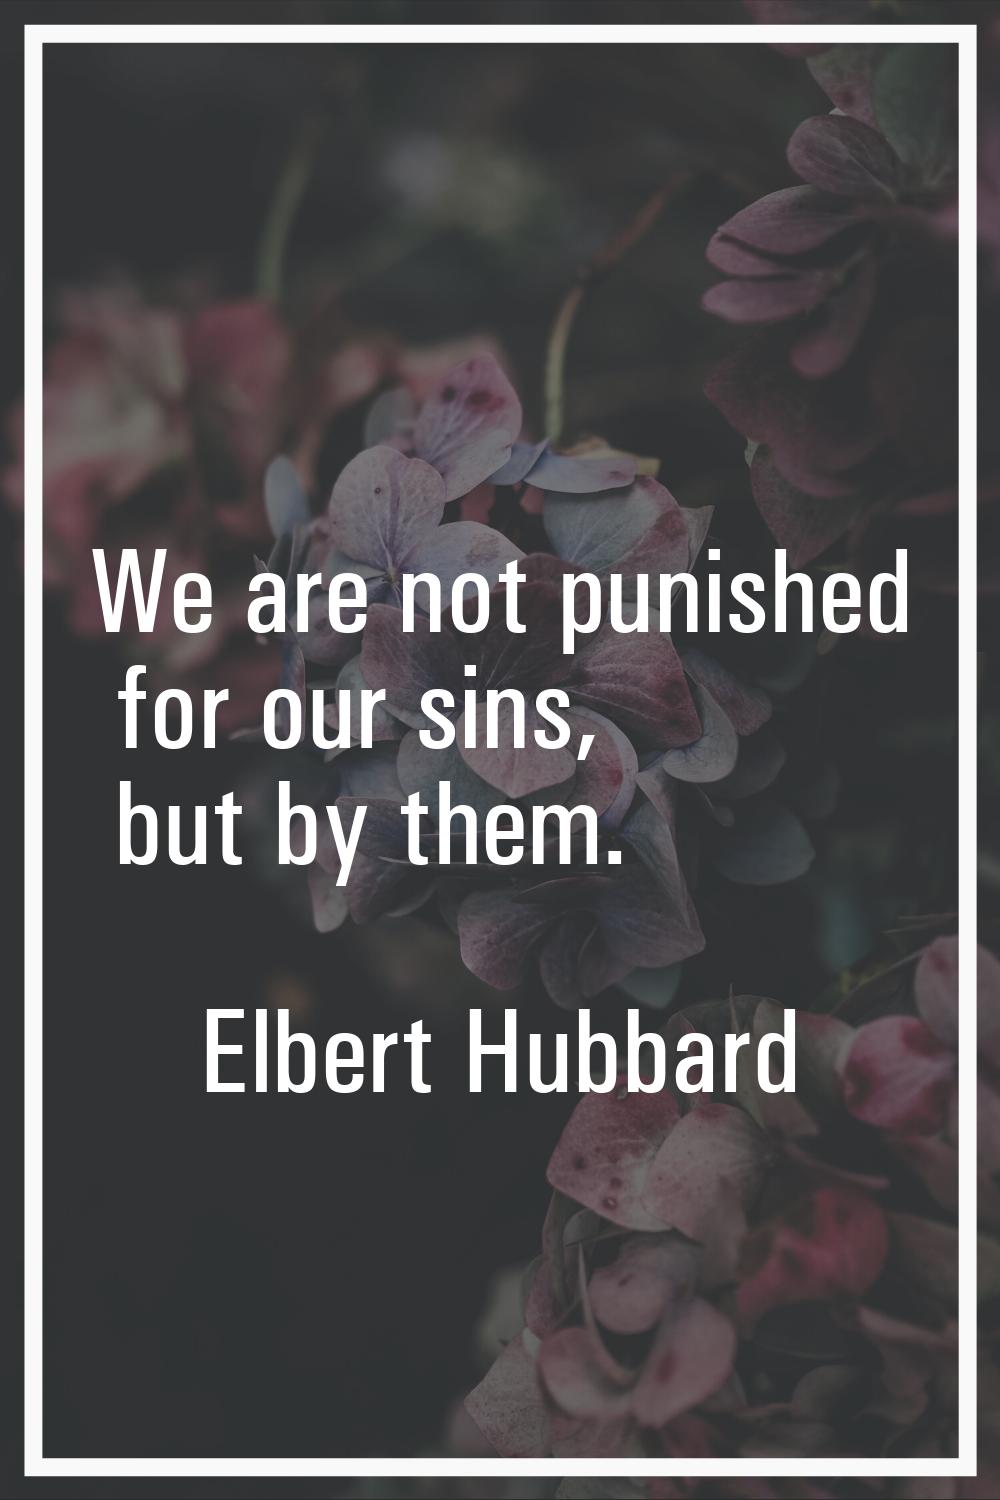 We are not punished for our sins, but by them.